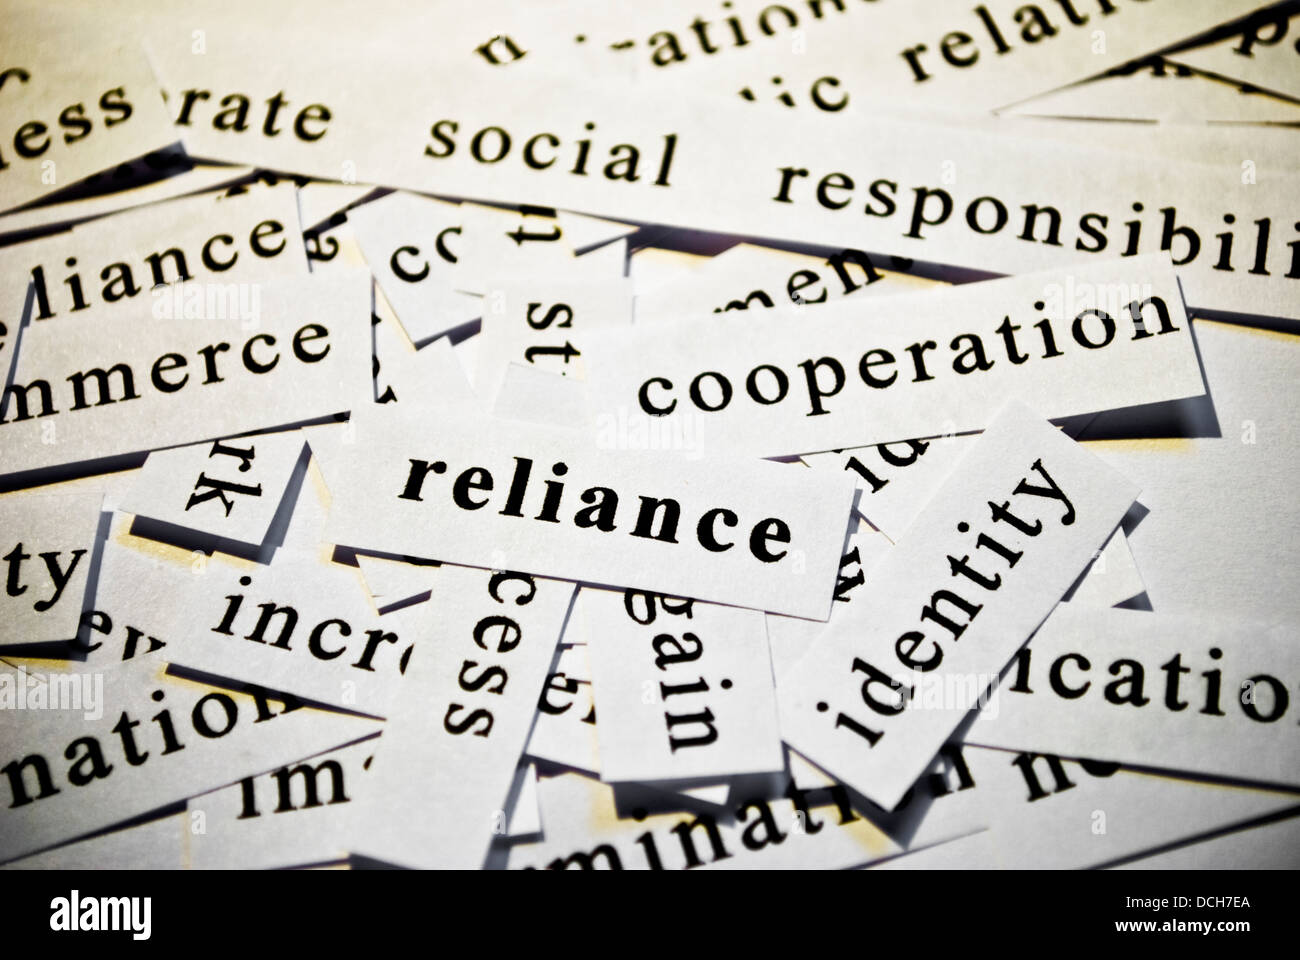 Reliance. Concept of cut-out words related with business activity Stock Photo